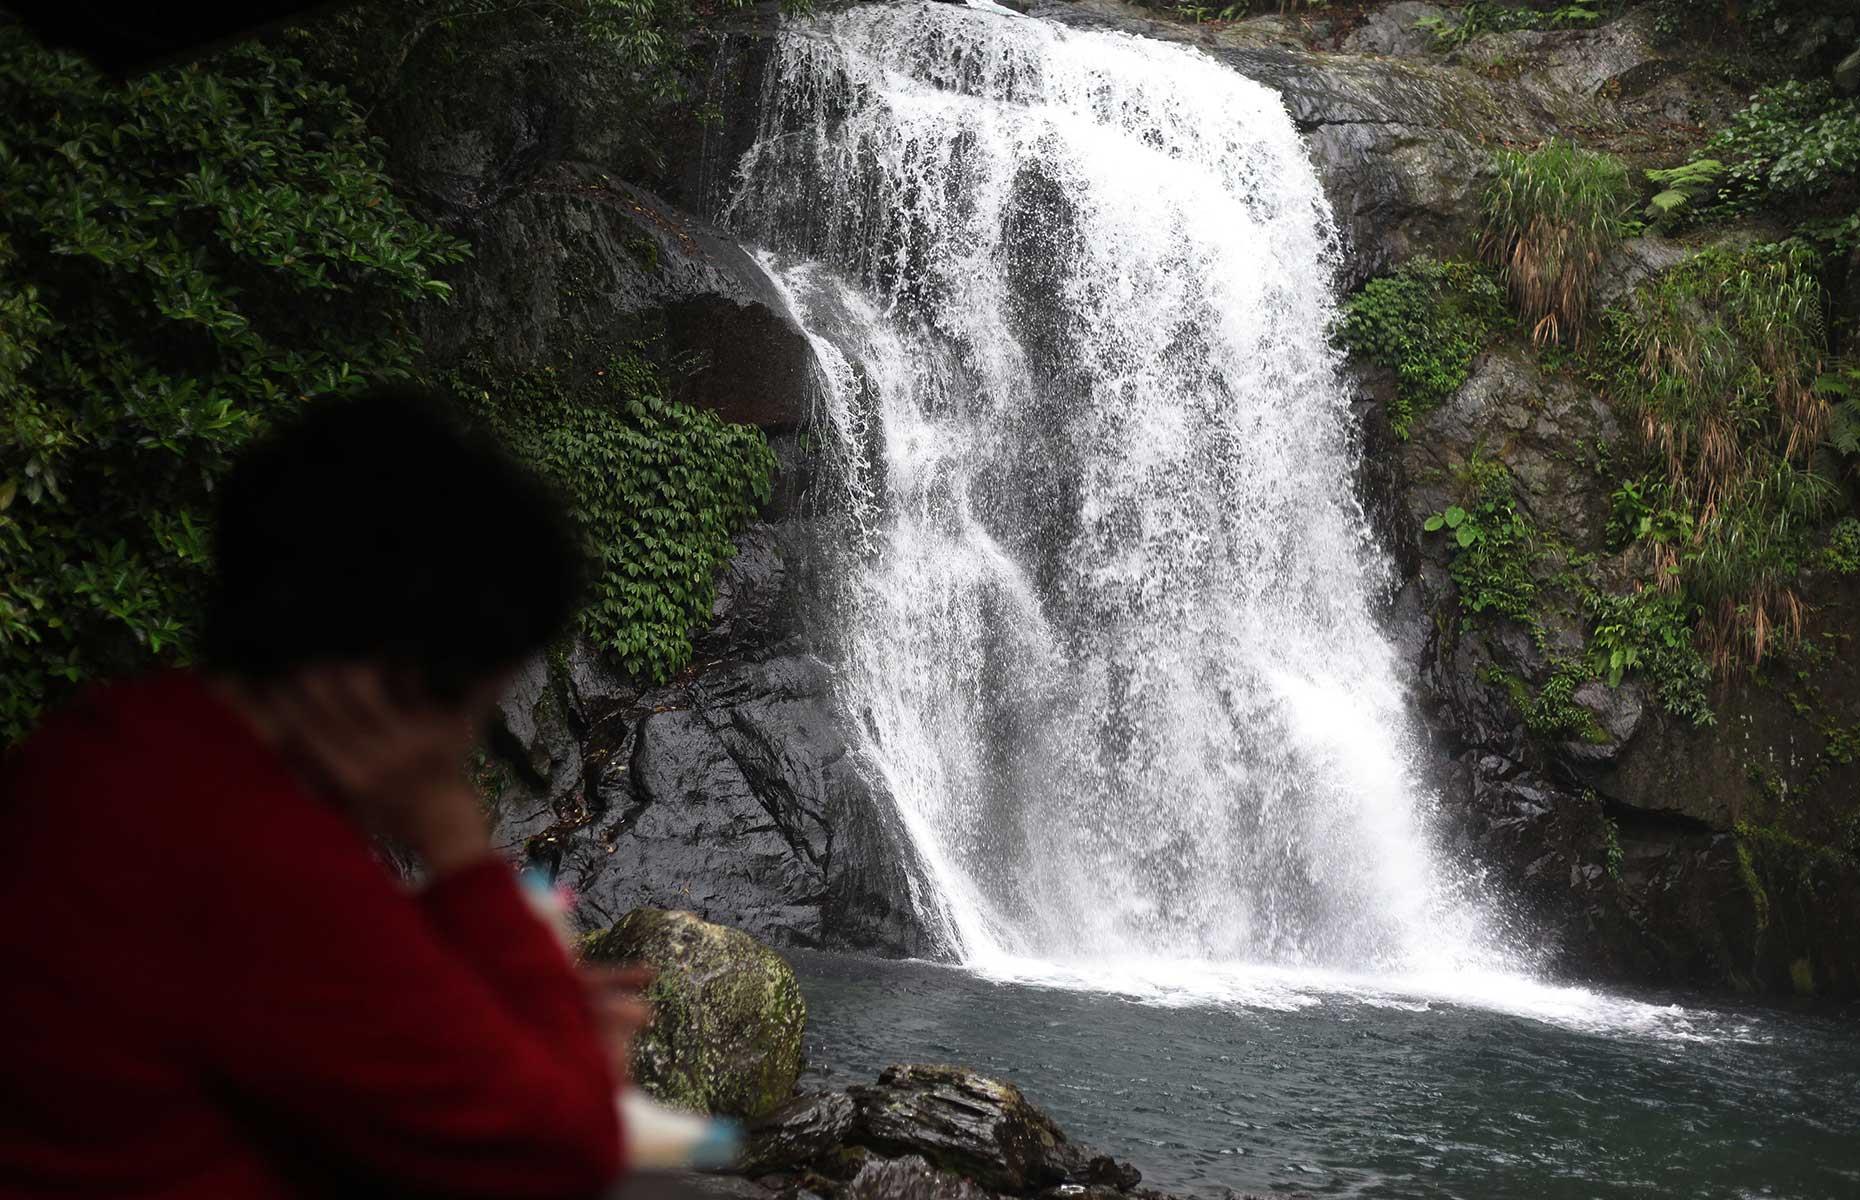 Take in the tumbling waterfalls and soak up the wonders of nature at Neidong National Forest. The tourist trail or rail-cart ride (previously used for transporting timber) allows visitors to admire the steep ravines, gushing streams and surrounding dense forest. You can watch the birds and butterflies pass by and take in the two rivers that run through the site. The popular XinXian Waterfall tumbles from a height of 43 feet (13m), which you’ll certainly hear before you see.